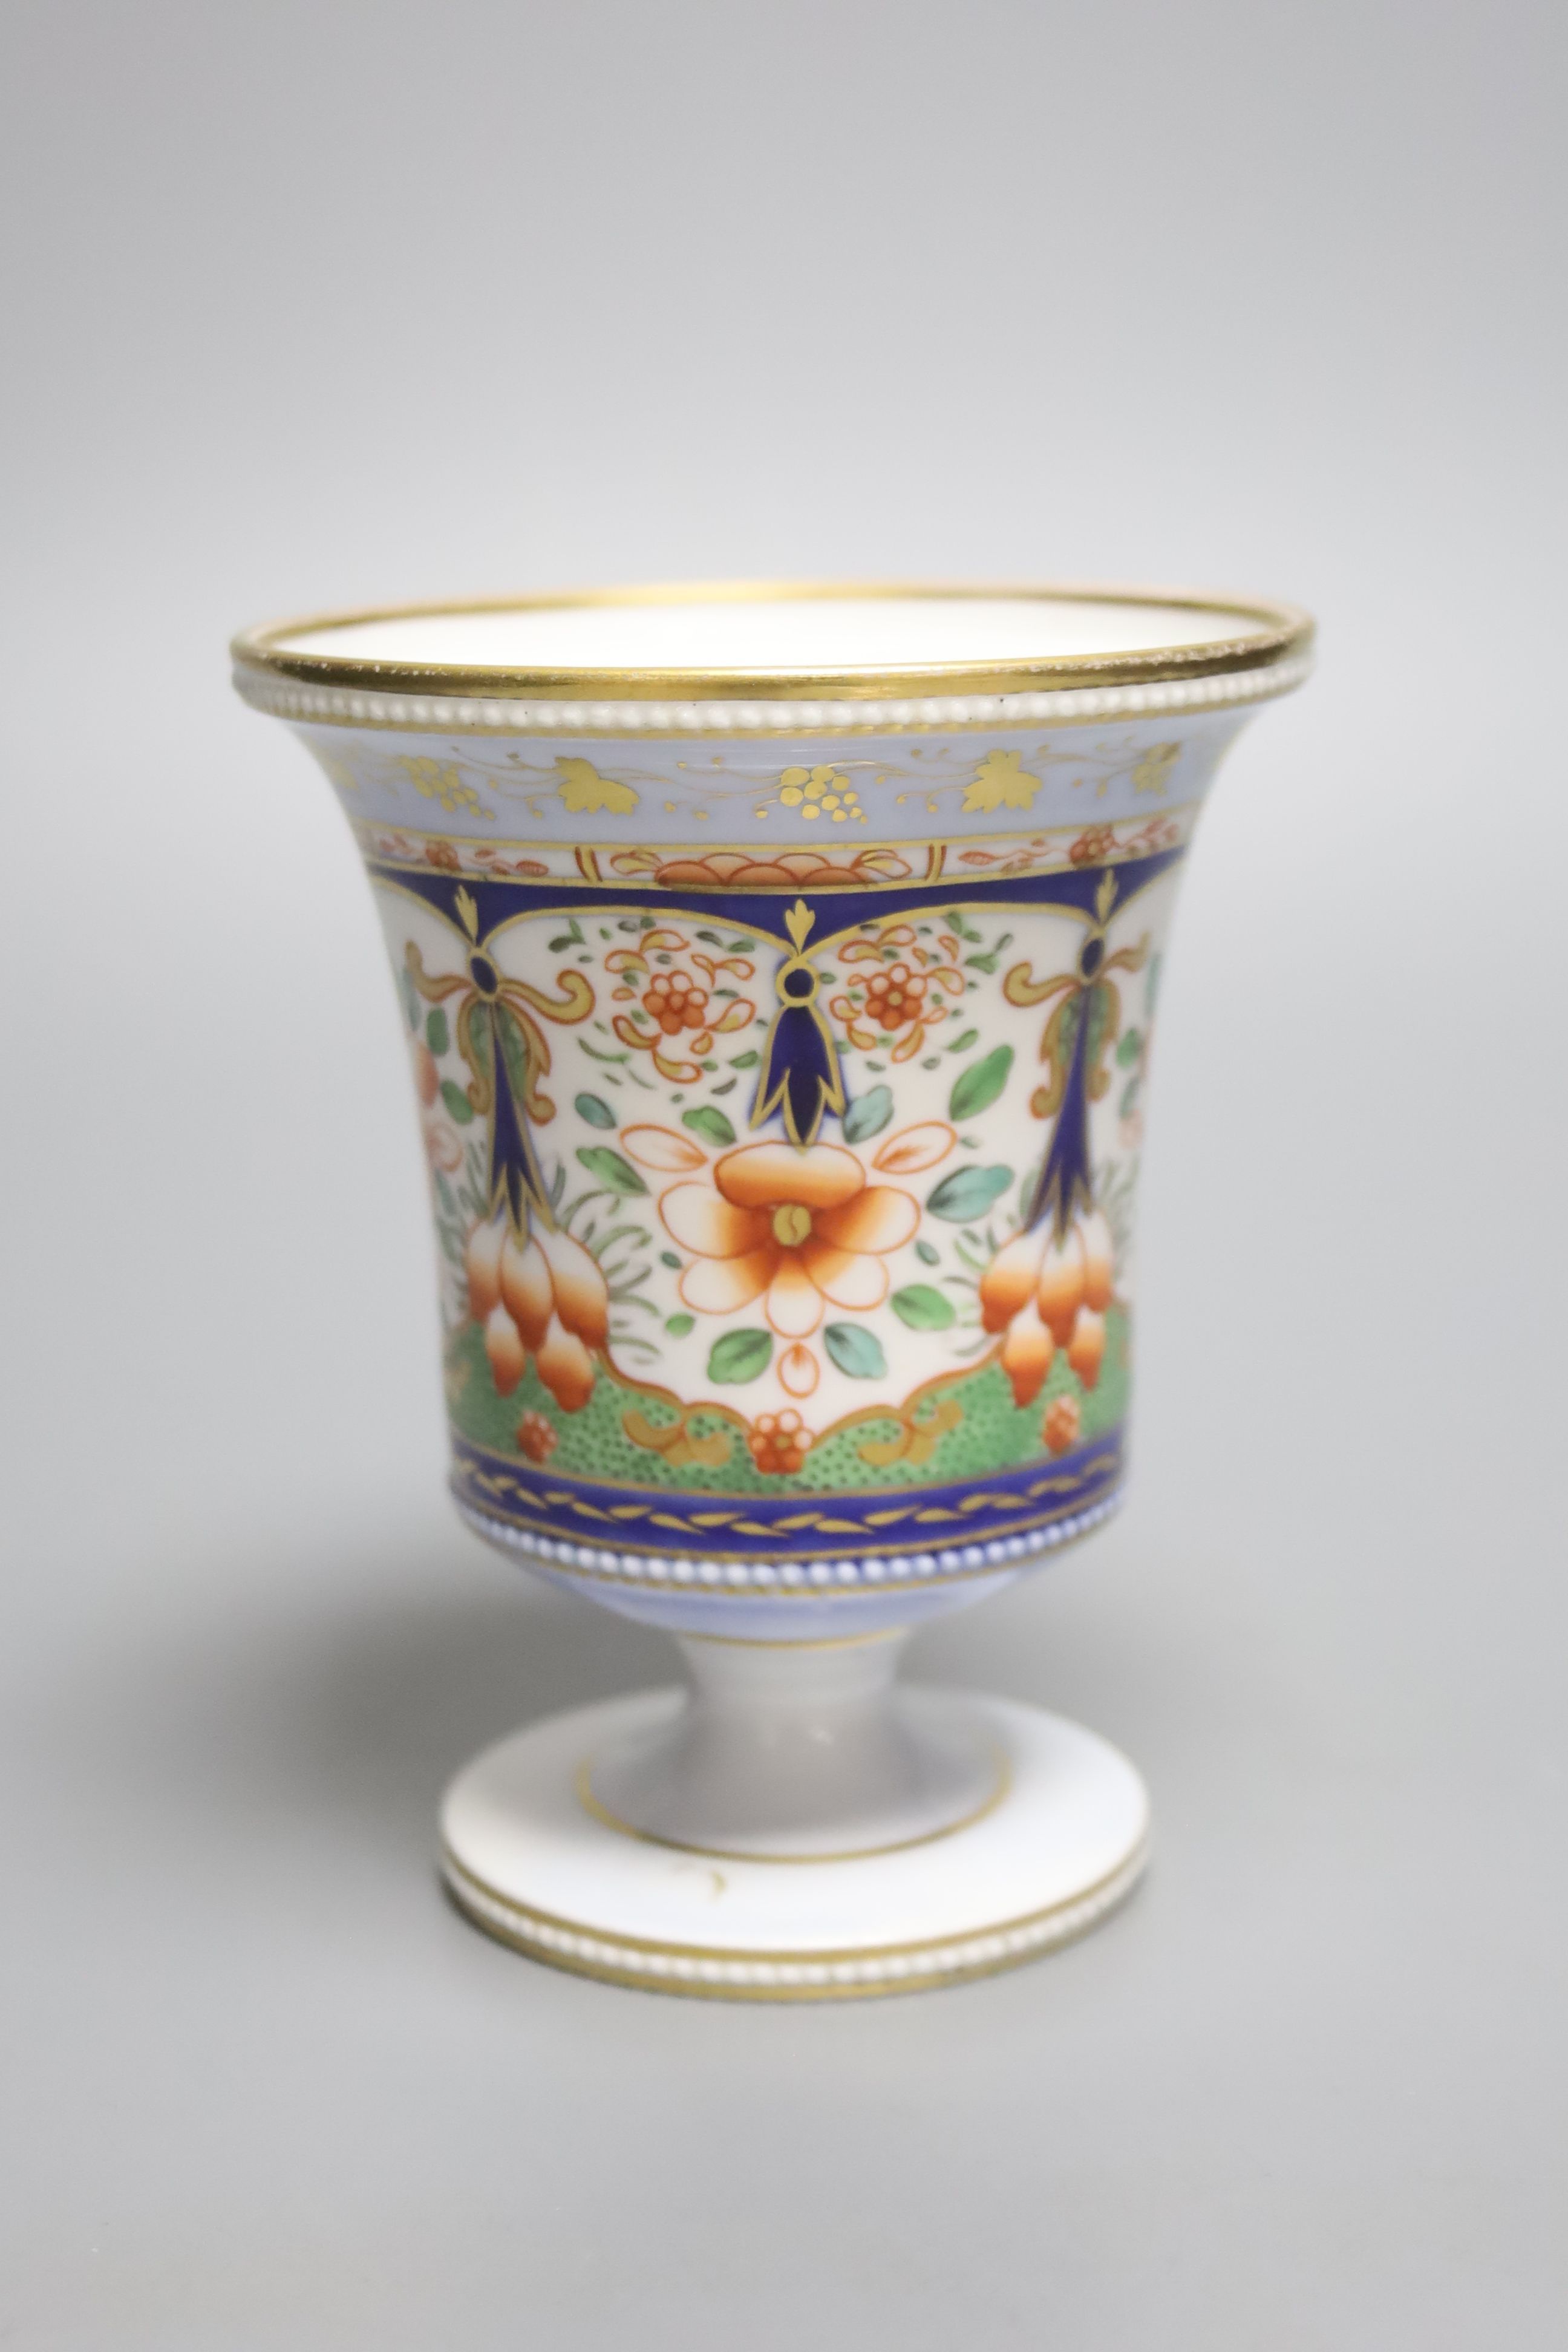 A Spode beaded vase decorated in stylised oriental style between two light blue and gilt borders, Spode 417 in red, c.1815, height 12cm